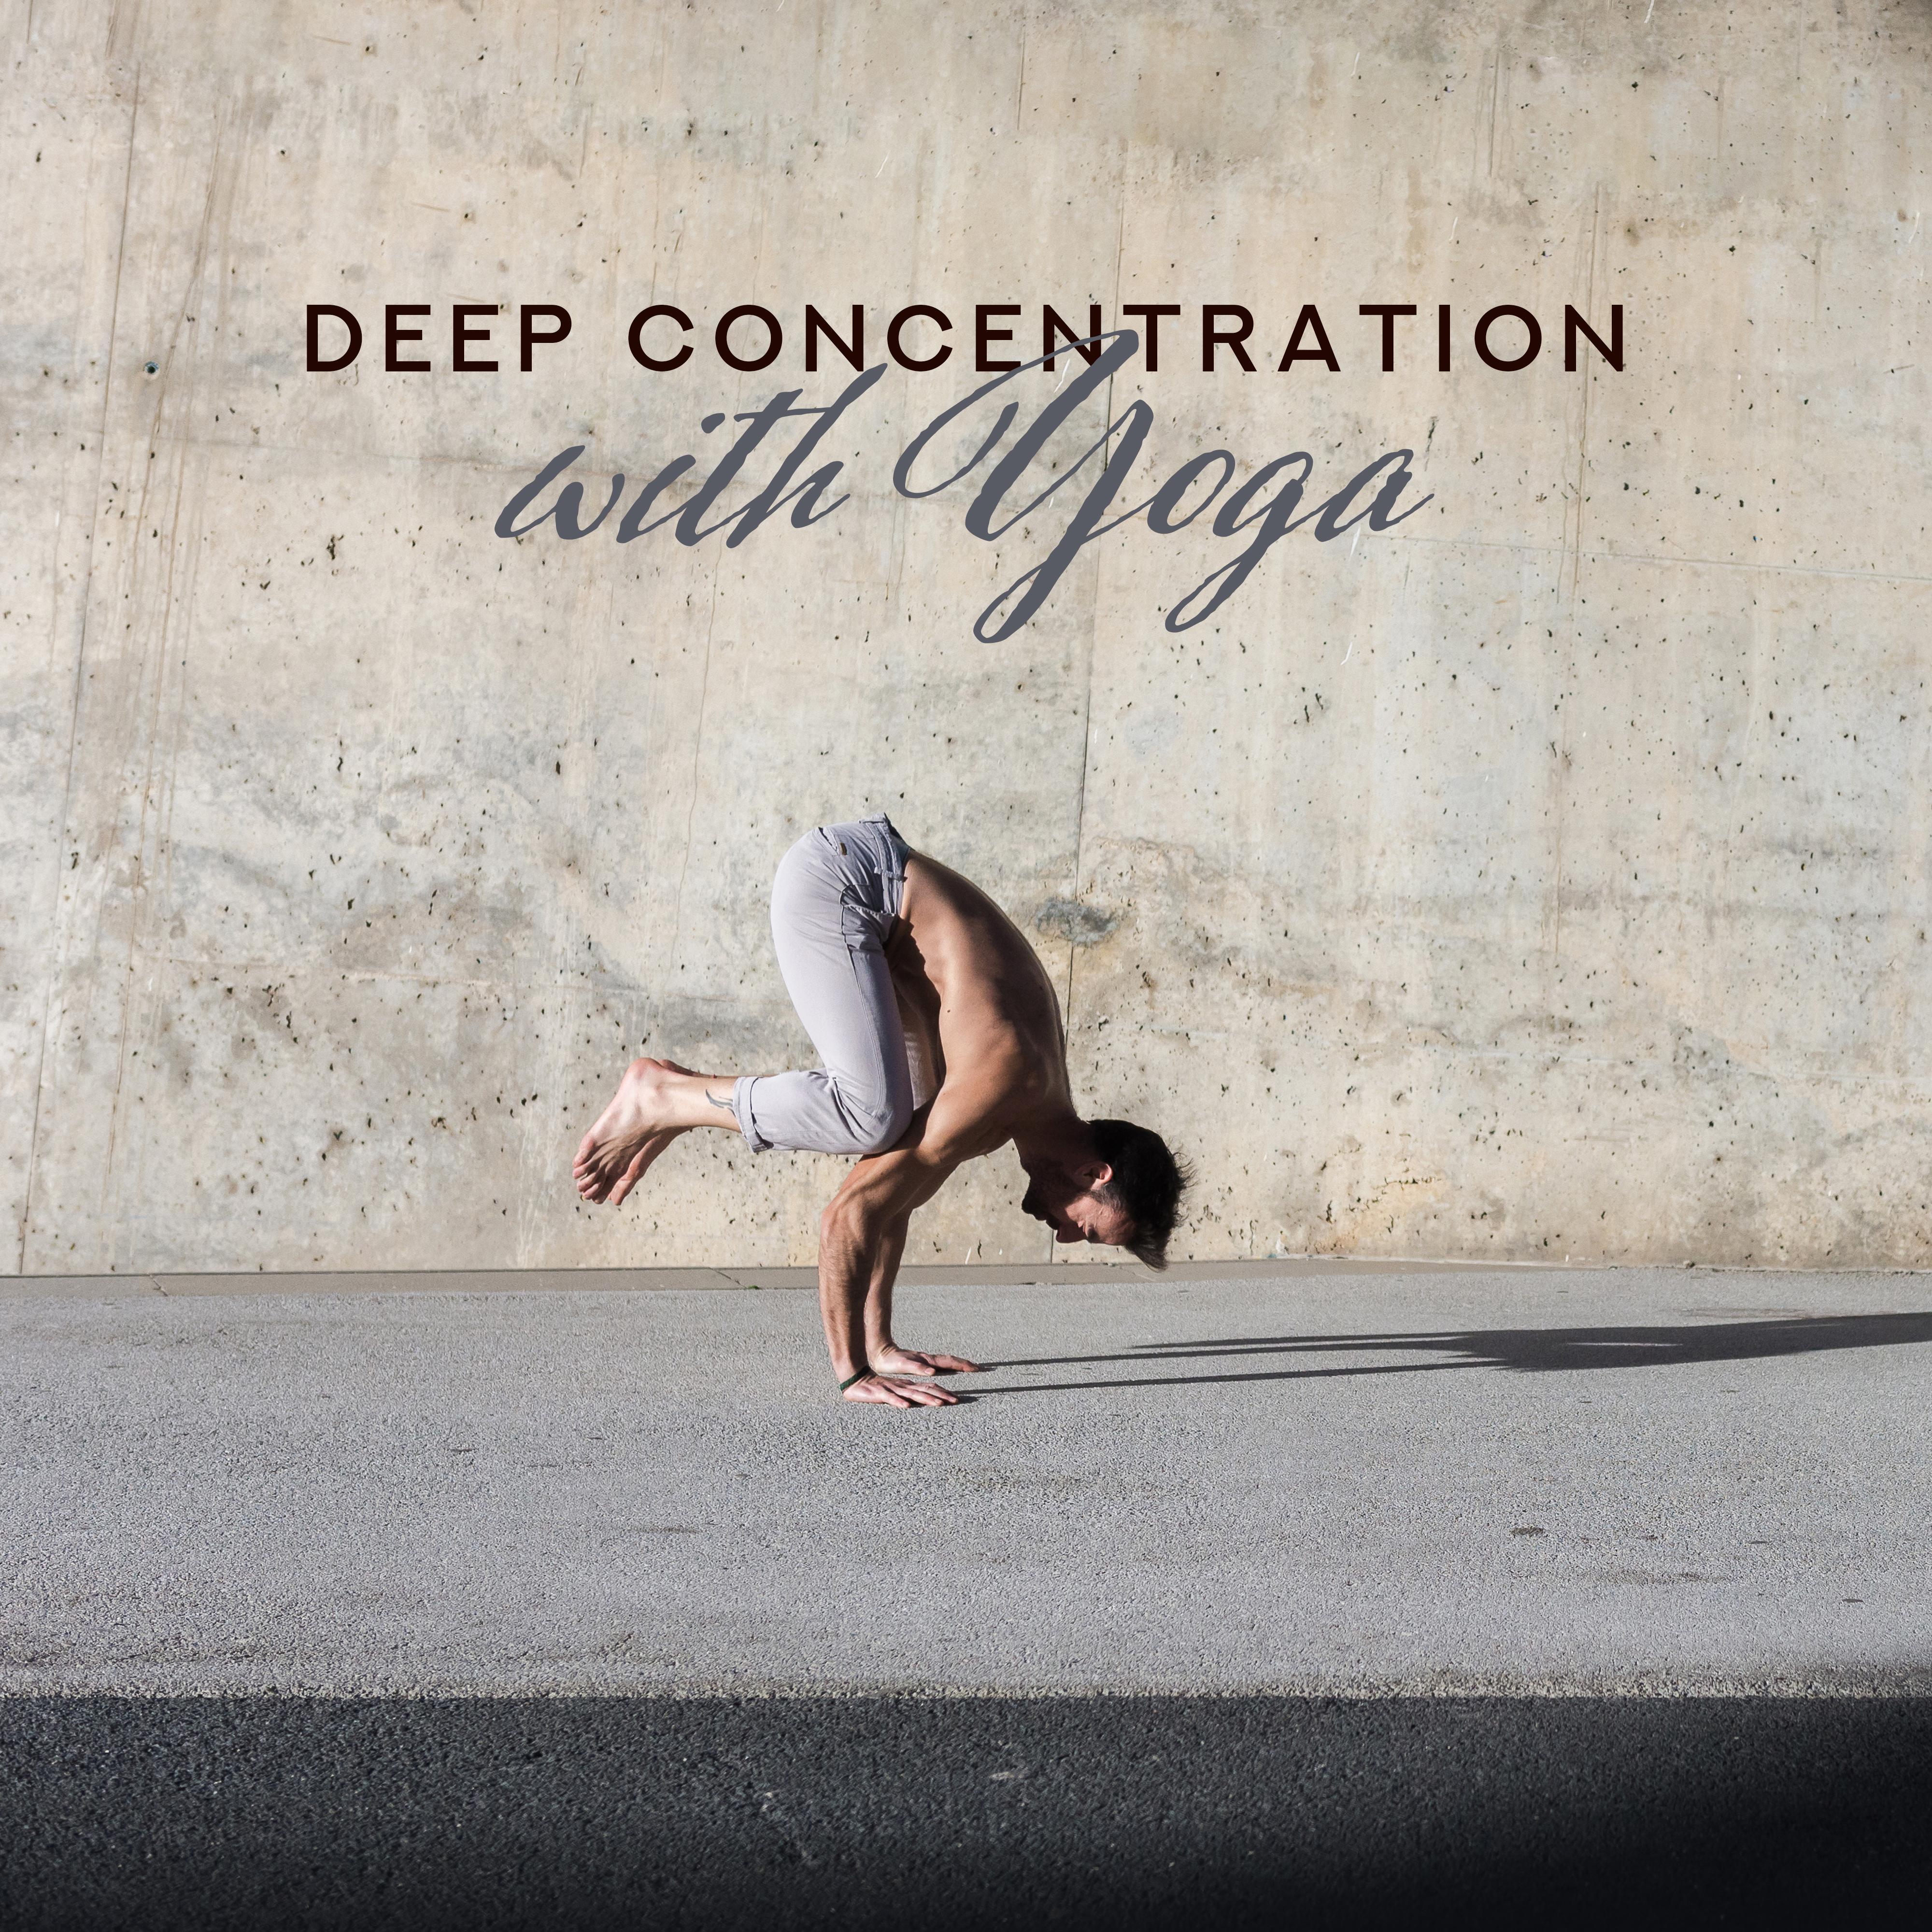 Deep Concentration with Yoga – Meditation Music for Relaxation, Inner Balance, Yoga Relaxing Mix, Zen, Lounge Music, Mindfulness Therapy, Music Zone